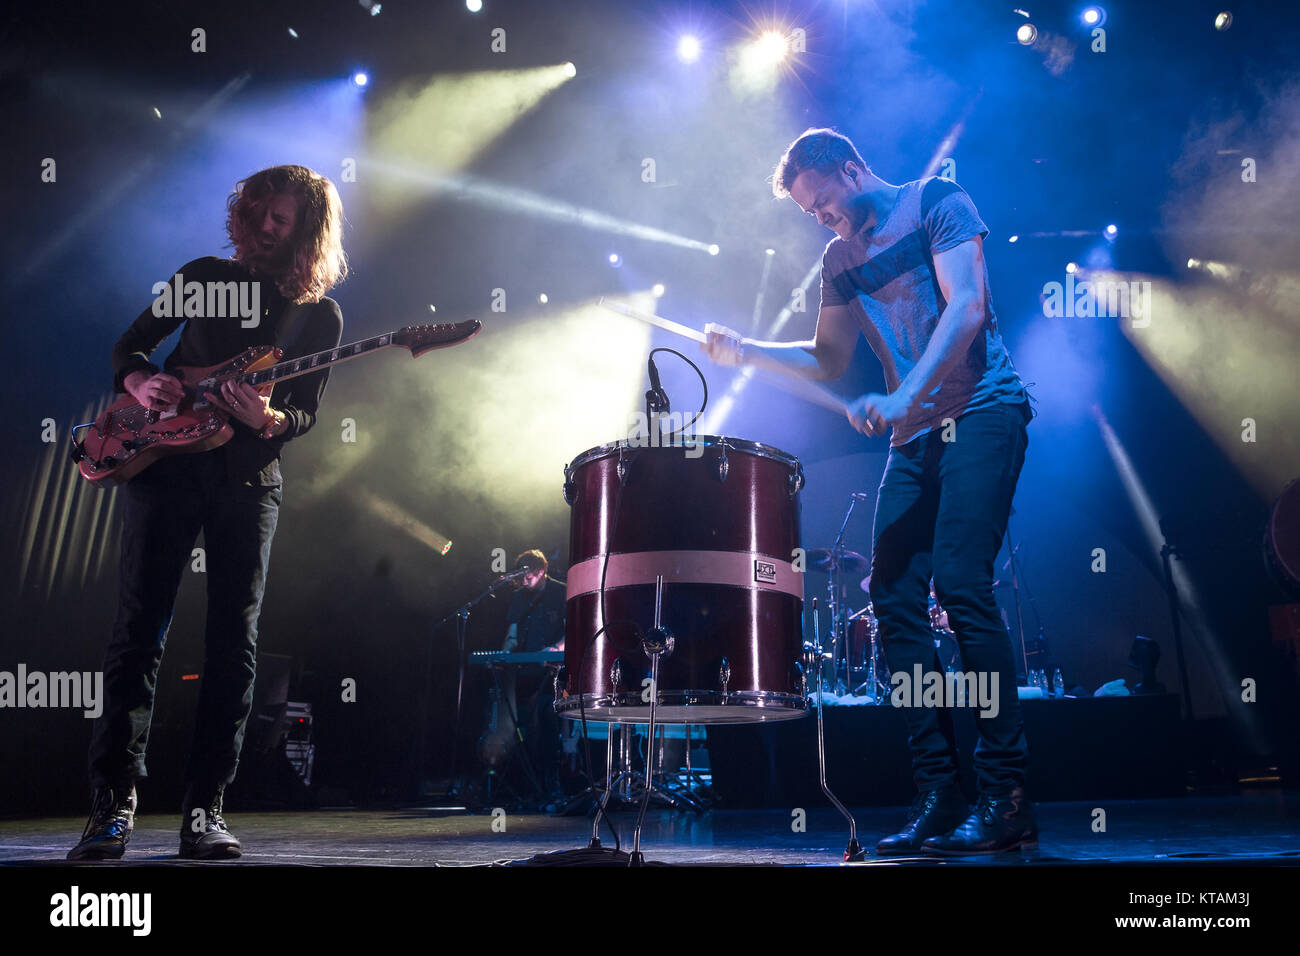 The American rock band Imagine Dragons performs a live concert at Falconer Salen in Copenhagen. Here lead singer Dan Reynolds is seen live on stage with guitarist Wayne Sermon. Denmark, 04/11 2014. Stock Photo